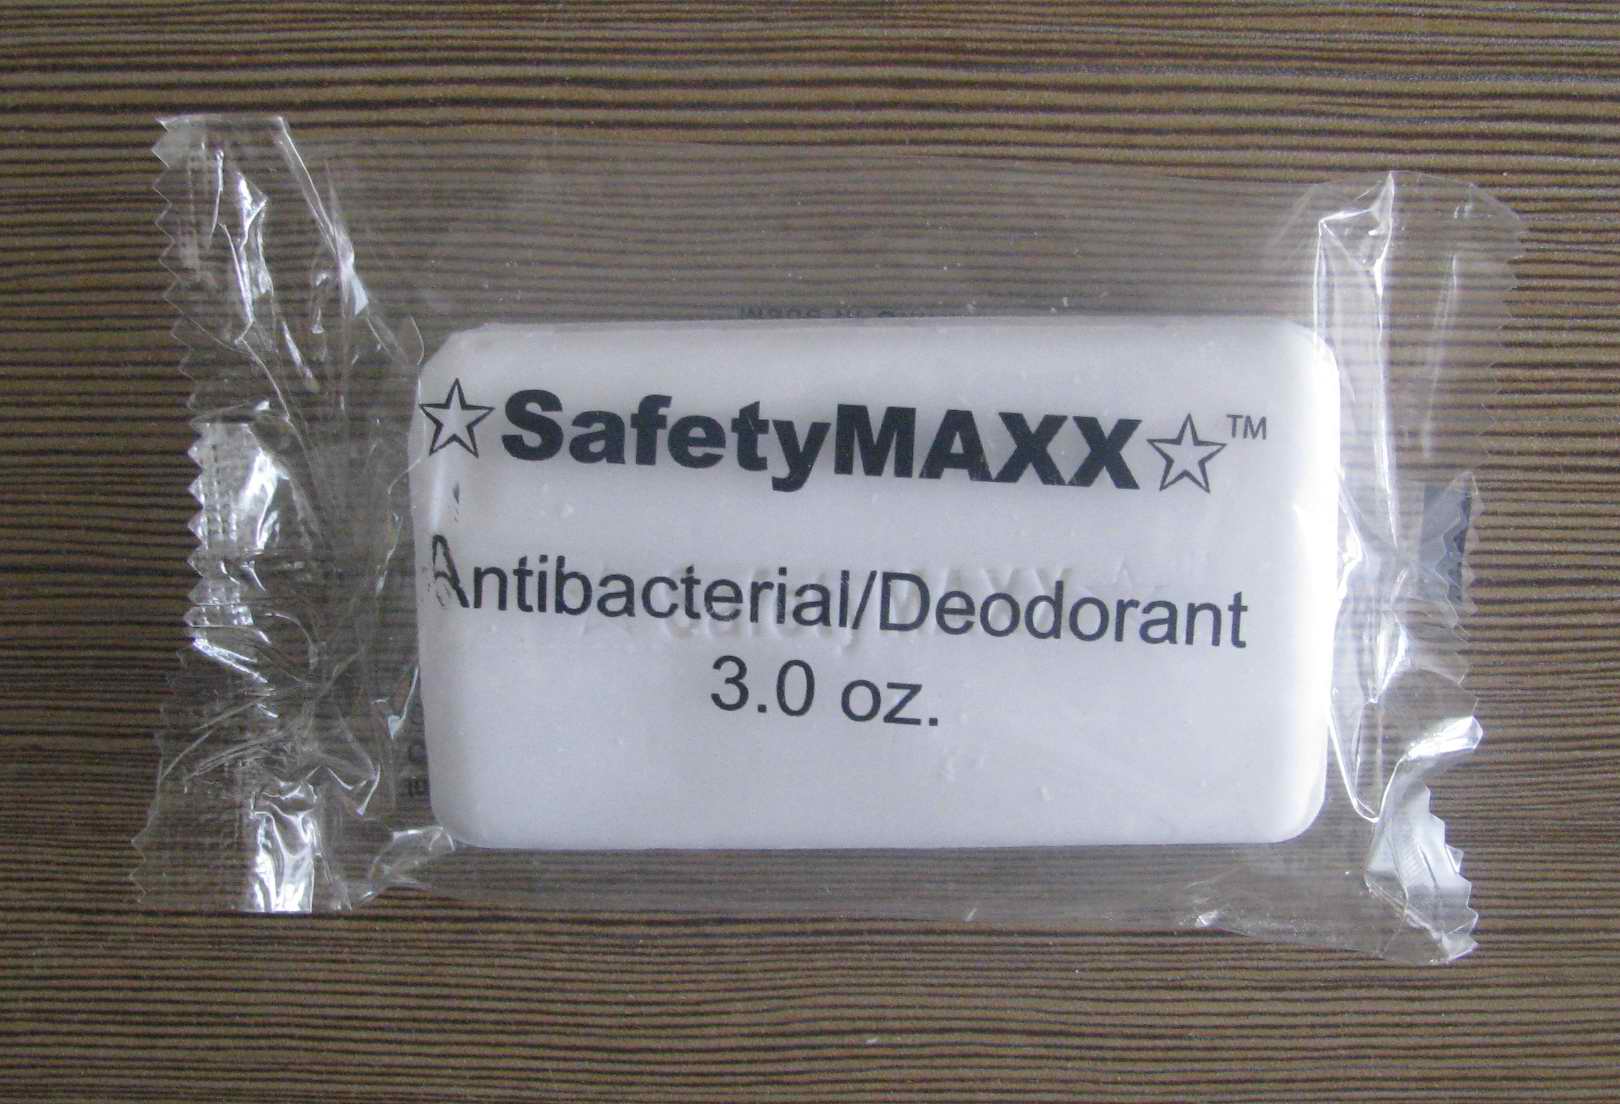 Anti-bacterial/Deodorant Soap wrapped 3oz